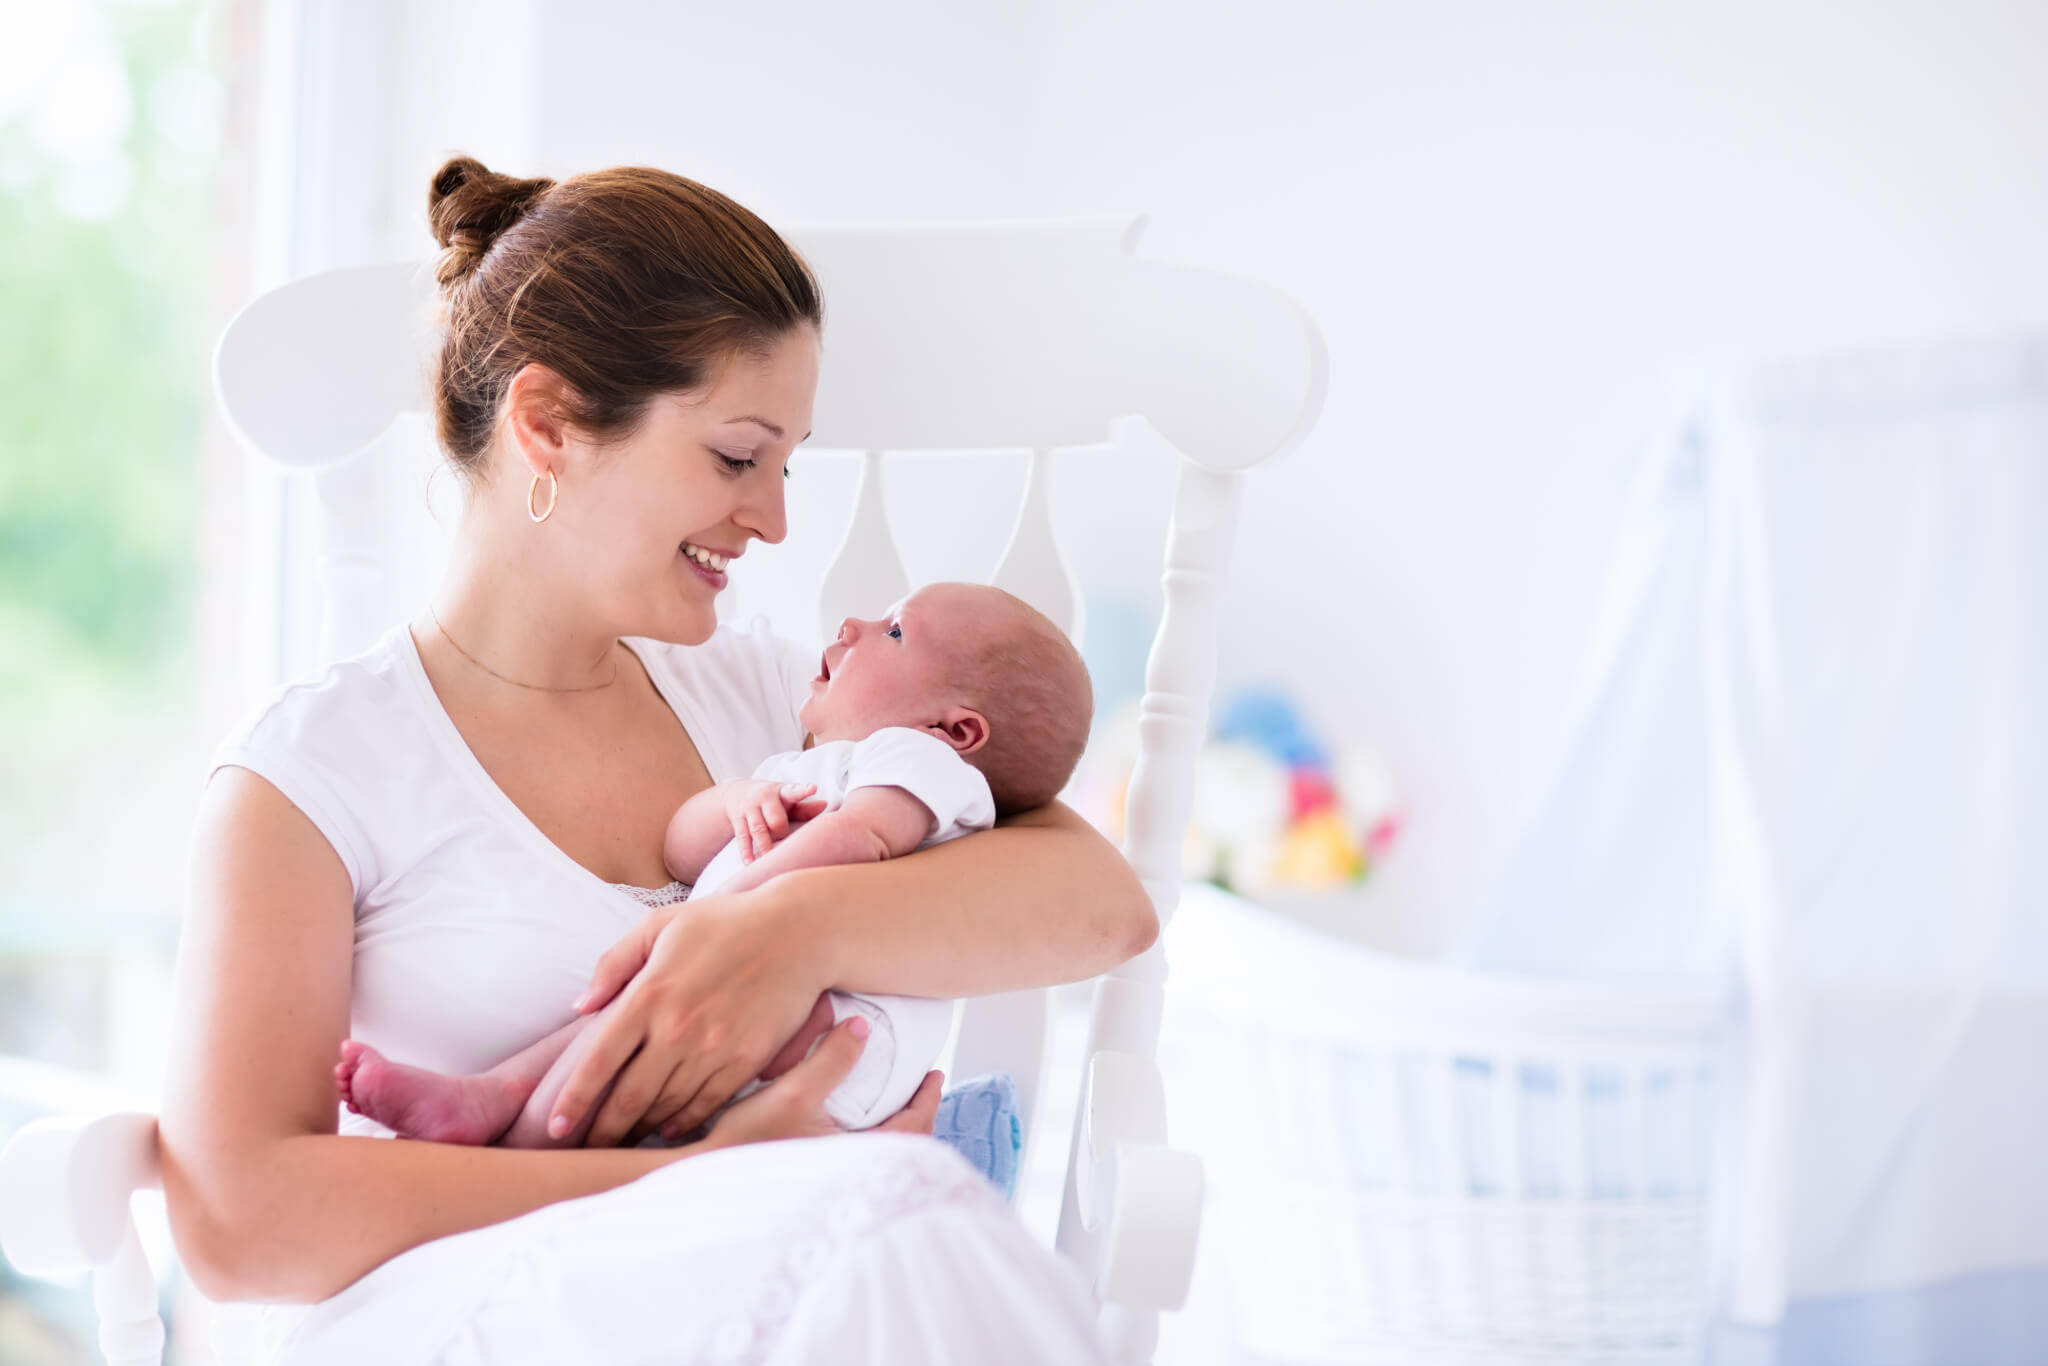 Can keto diet be used during the breastfeeding?